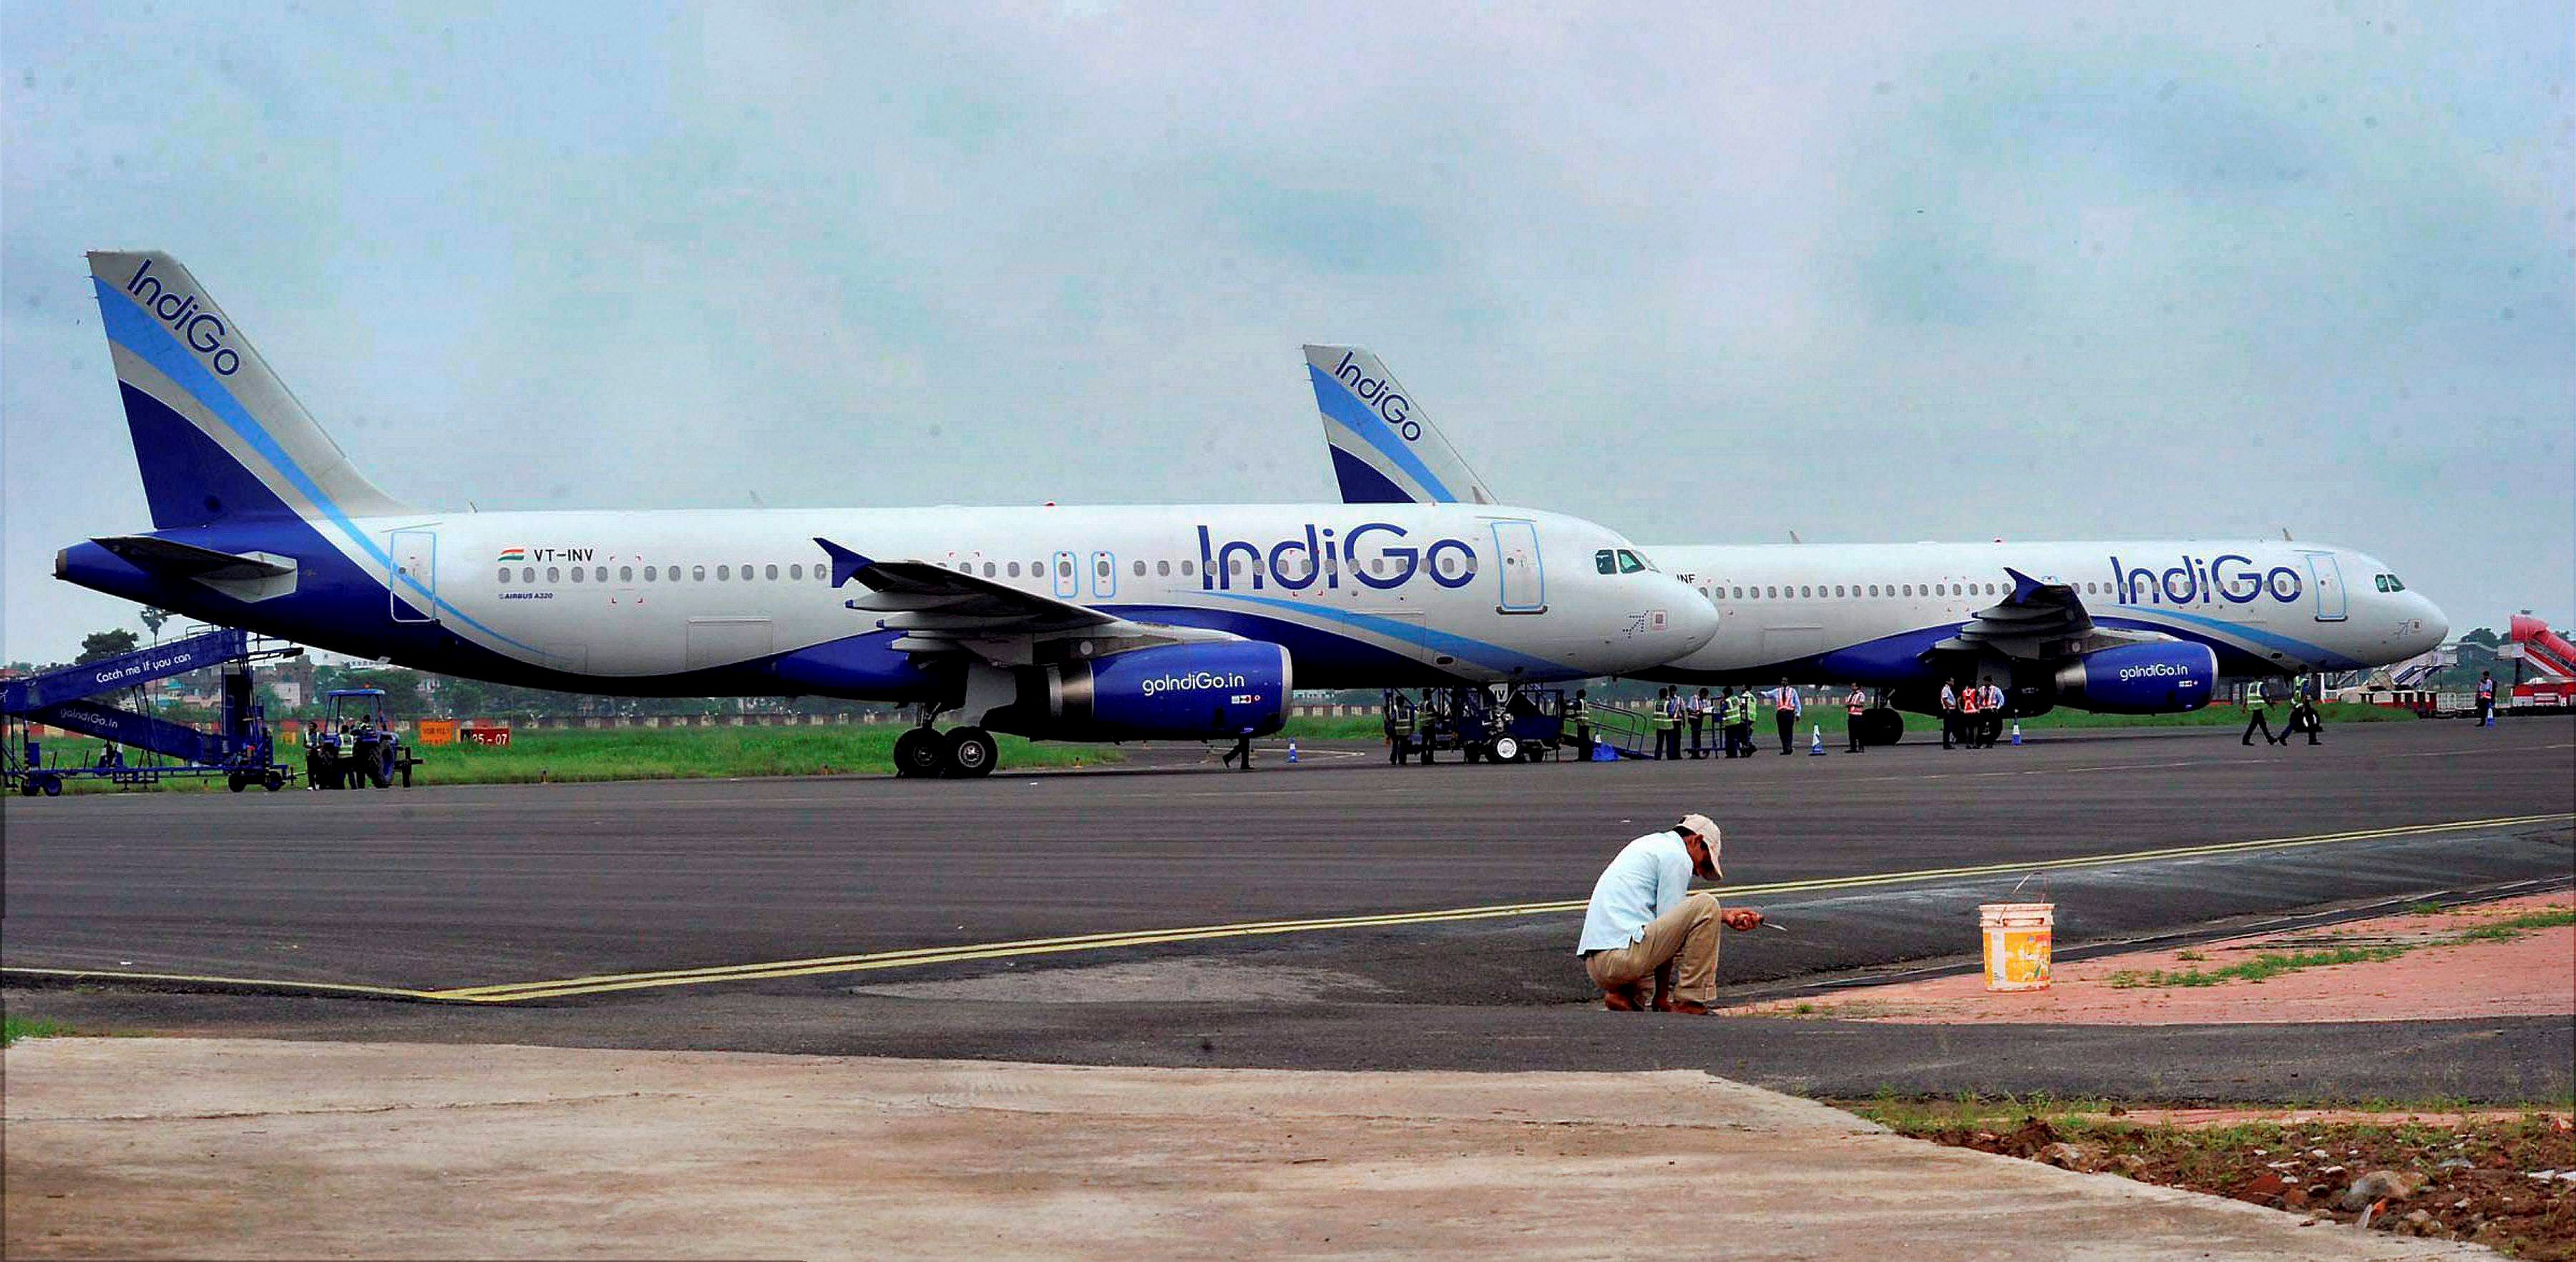 Aircraft owned by Indigo and other carriers were grounded earlier due to engine issues. Credit: PTI Photo